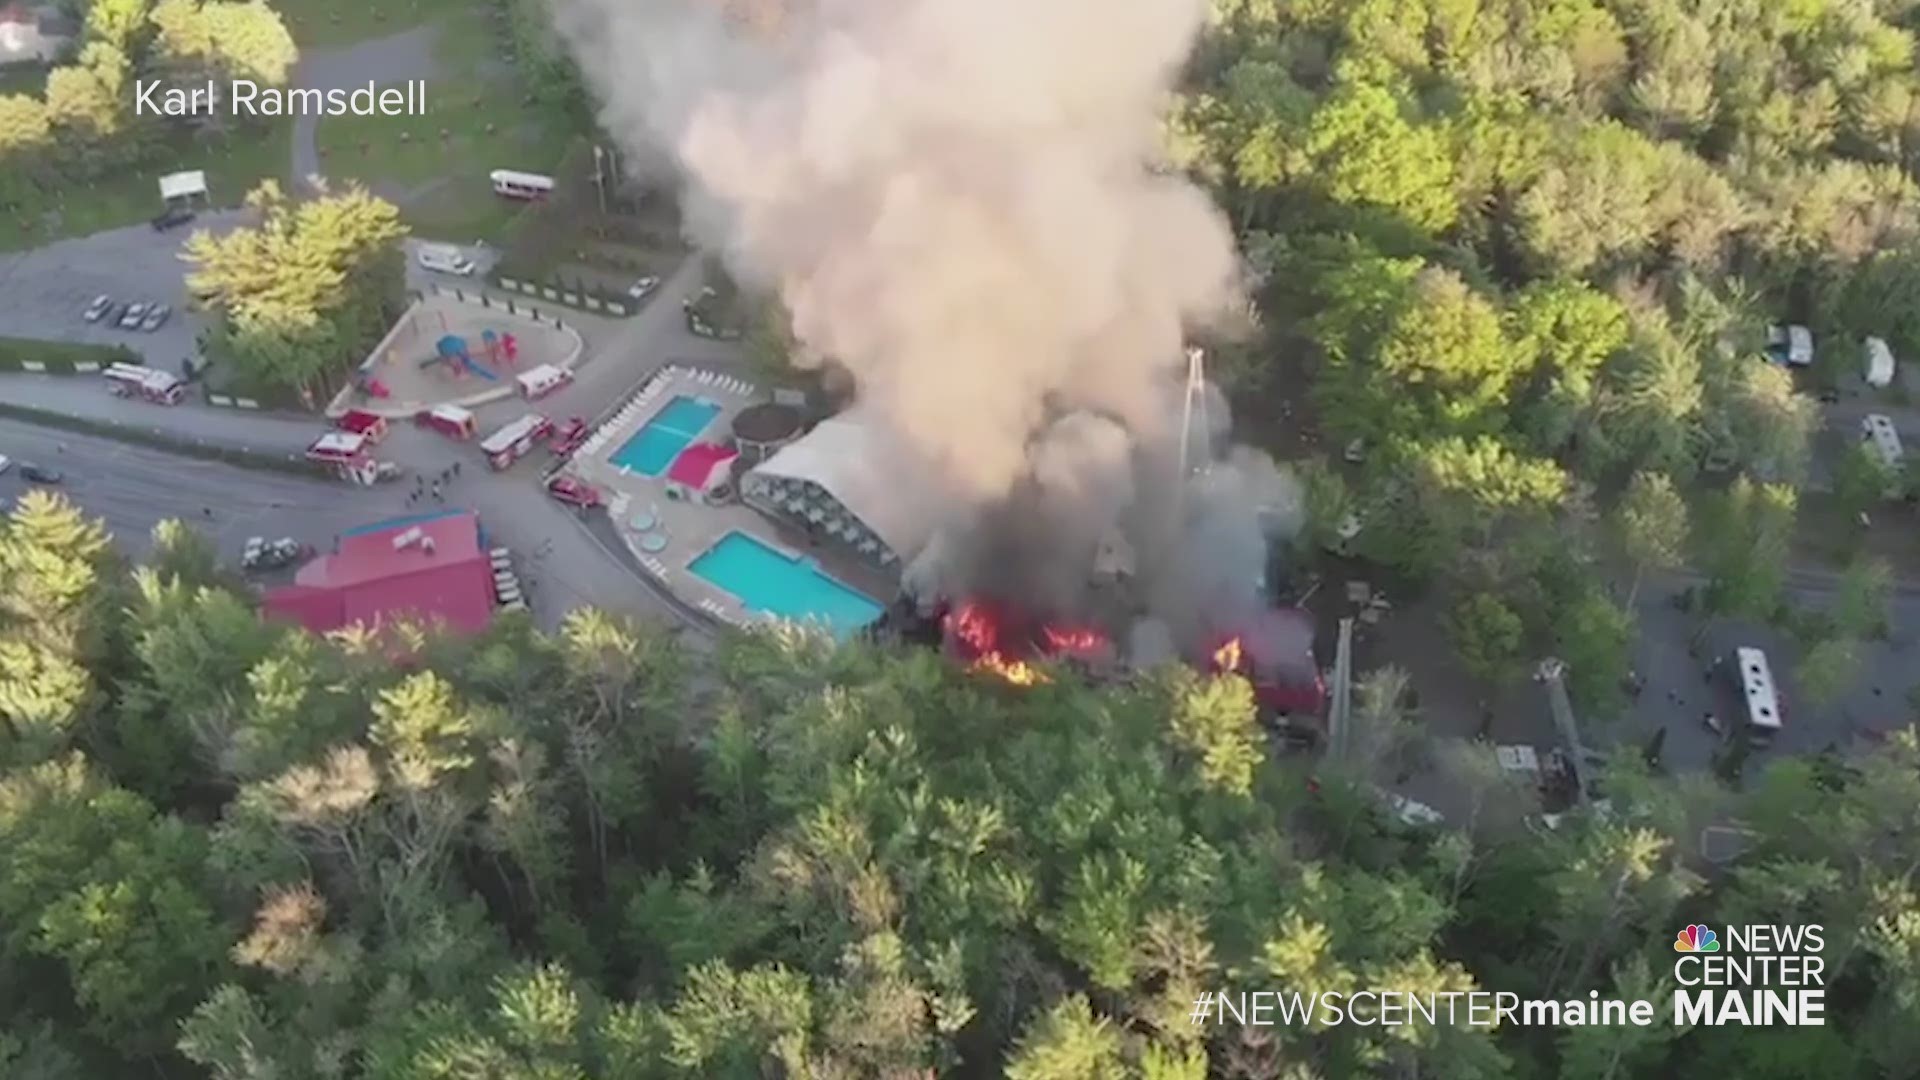 Karl Ramsdell captured drone footage of the fire at Bayley's Camping Resort in Scarborough Tuesday evening.